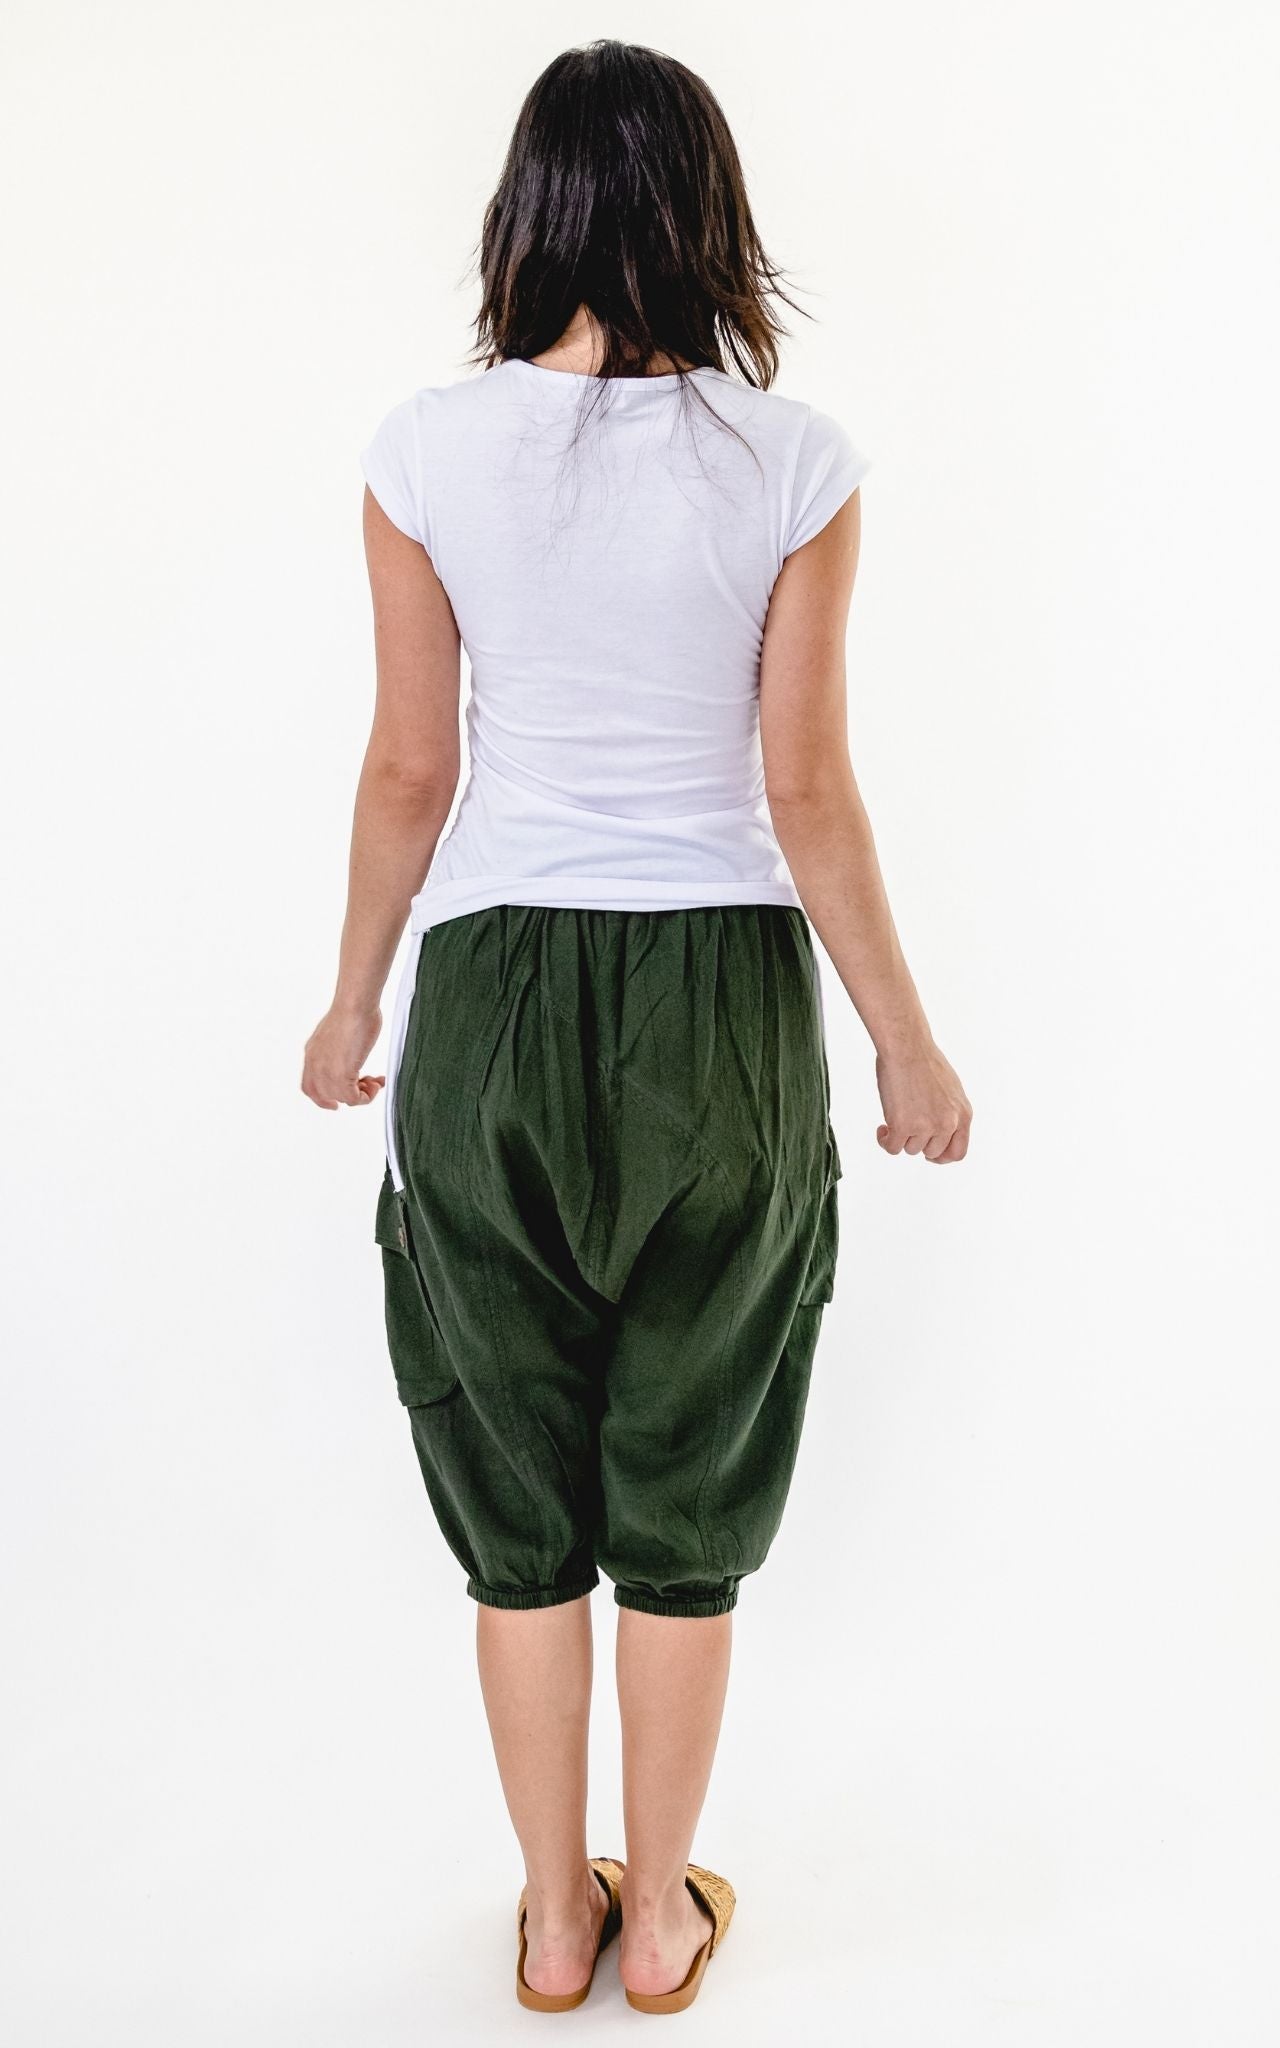 Surya Australia Ethical Cotton Drop Crotch Shorts made in Nepal - Green